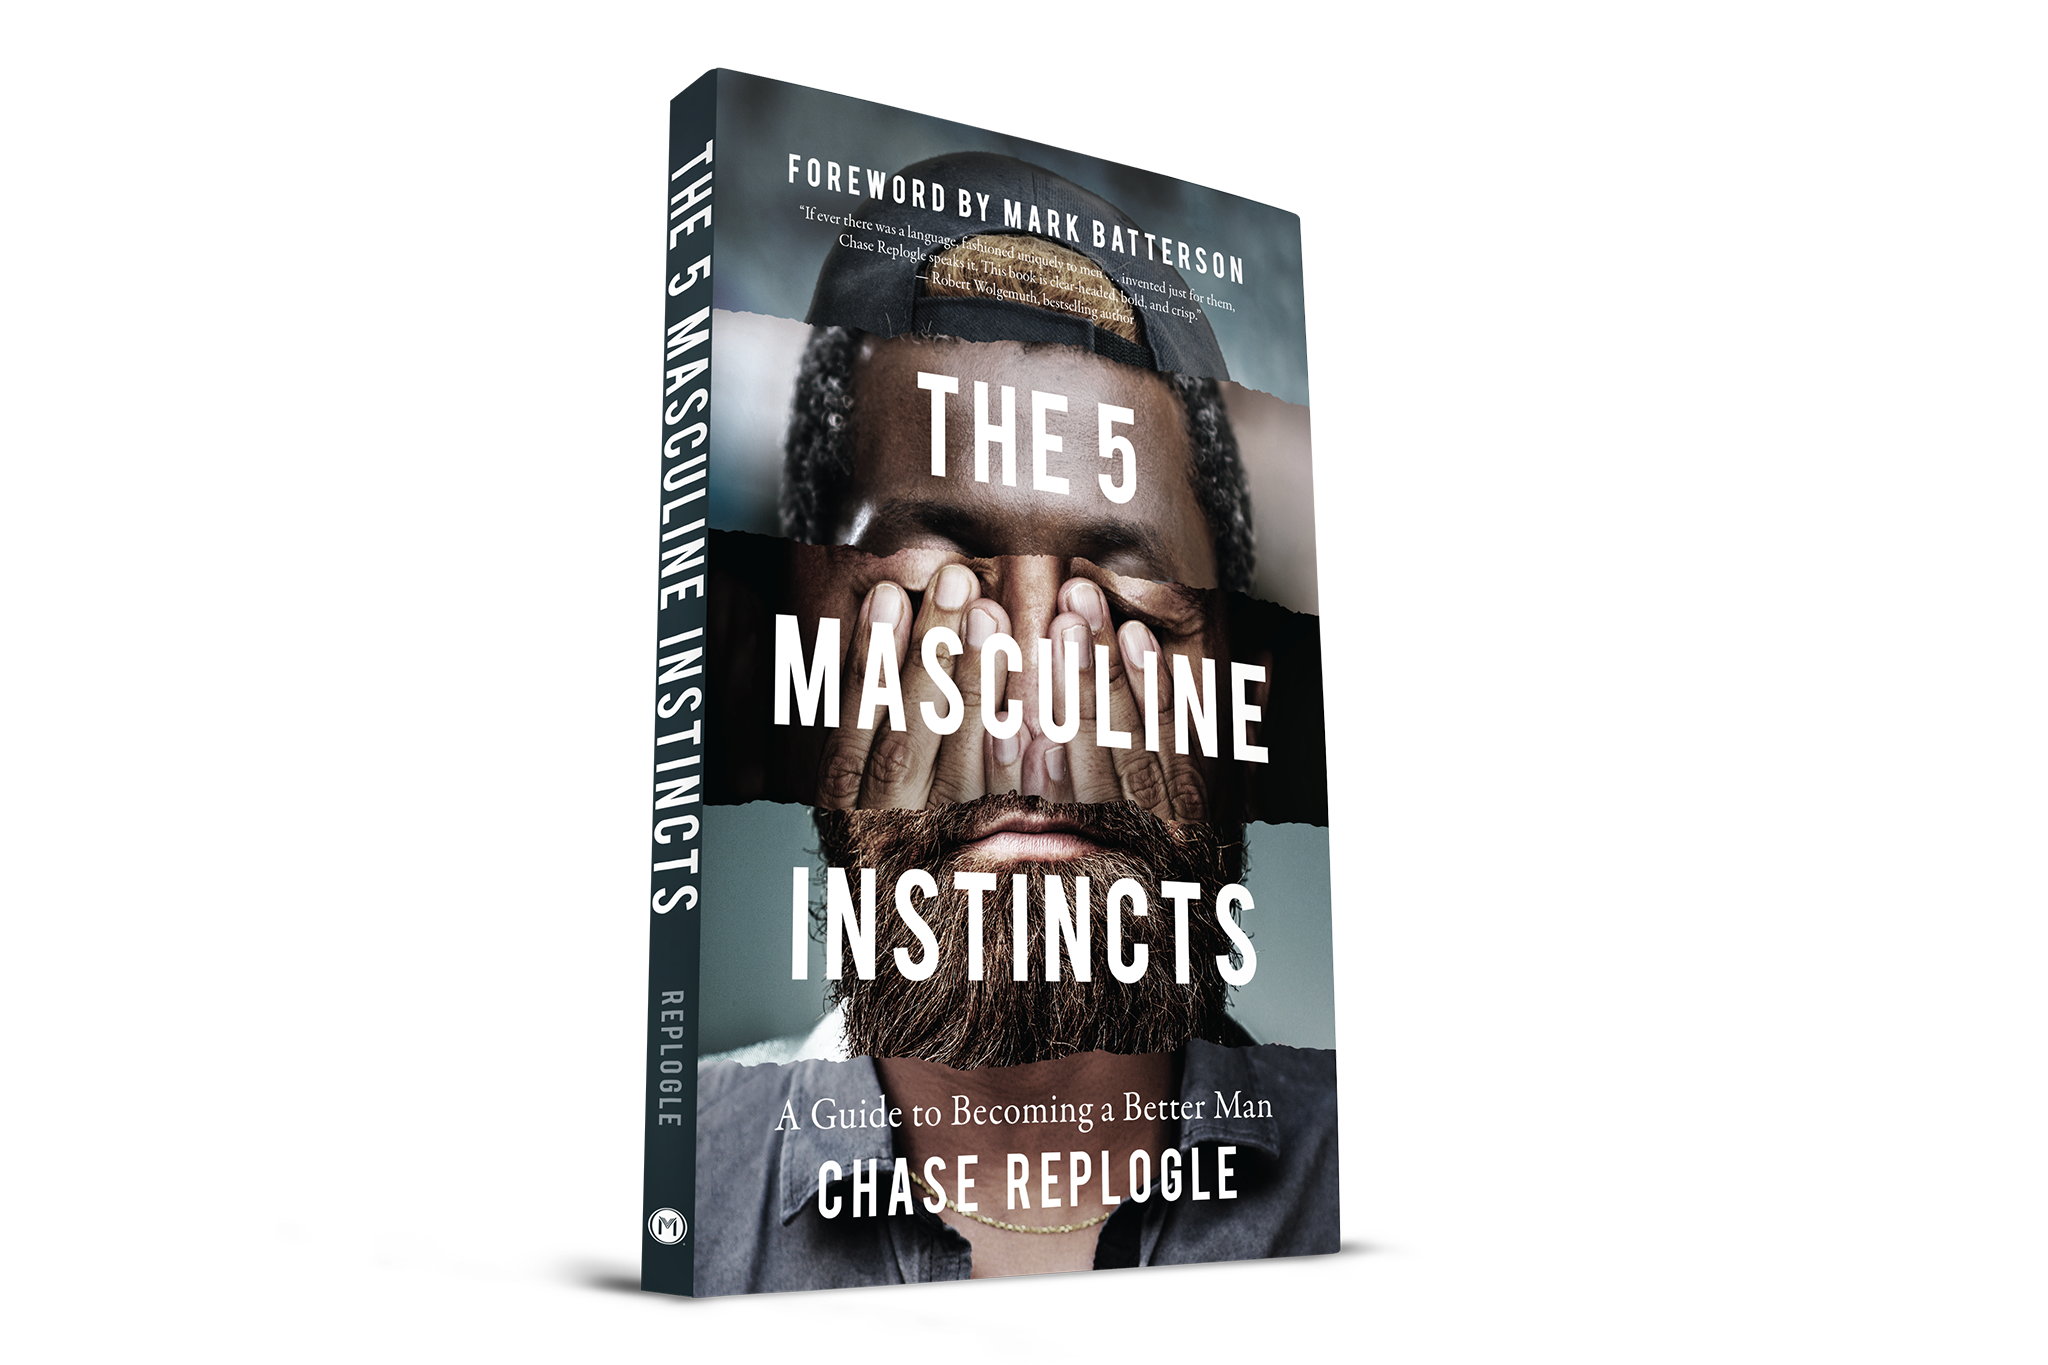 "The 5 Masculine Instincts” by Chase Replogle, courtesy of Moody Publishers